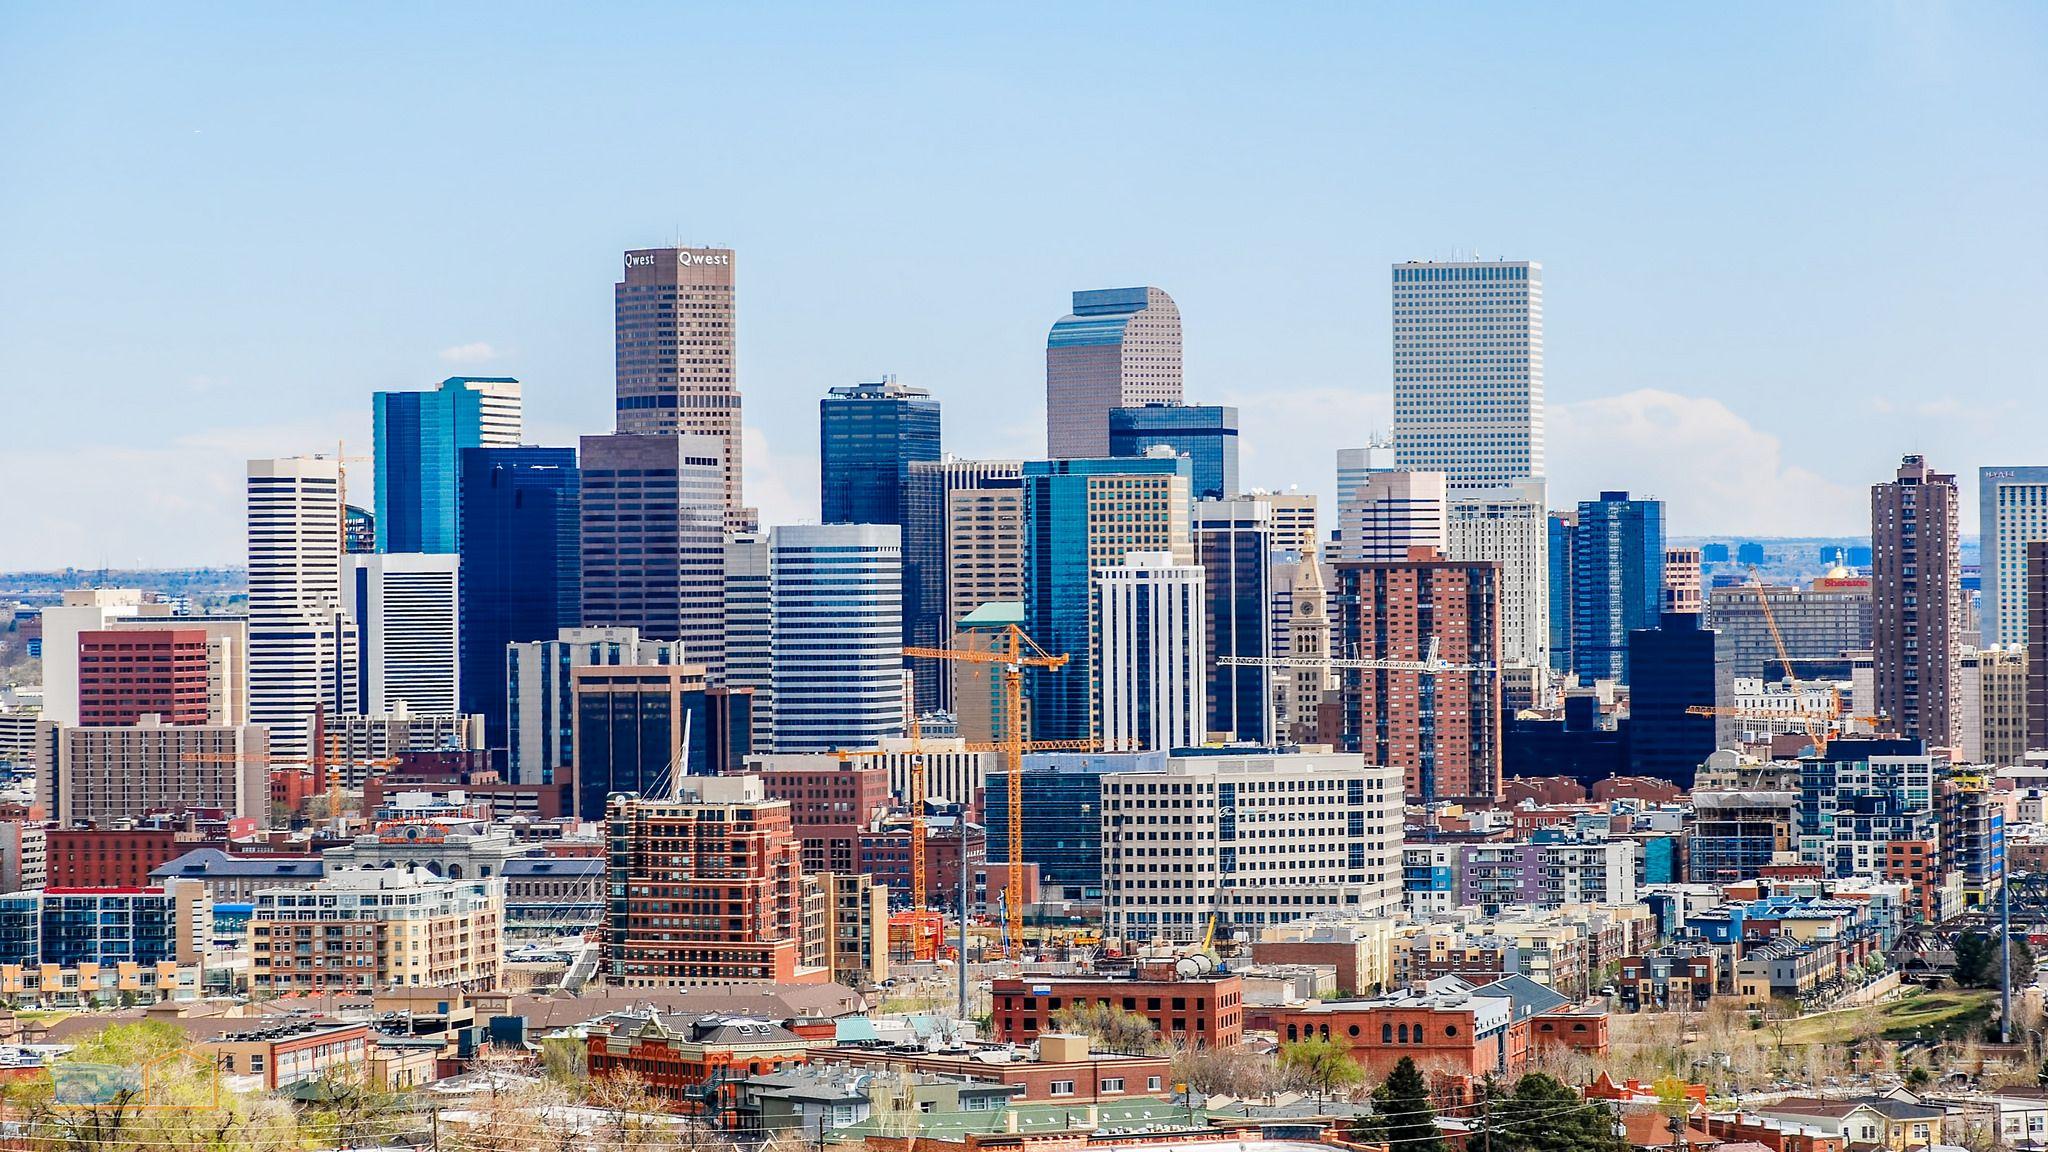 Colorful Denver CO [2048 x 1152]. wallpaper/ background for iPad